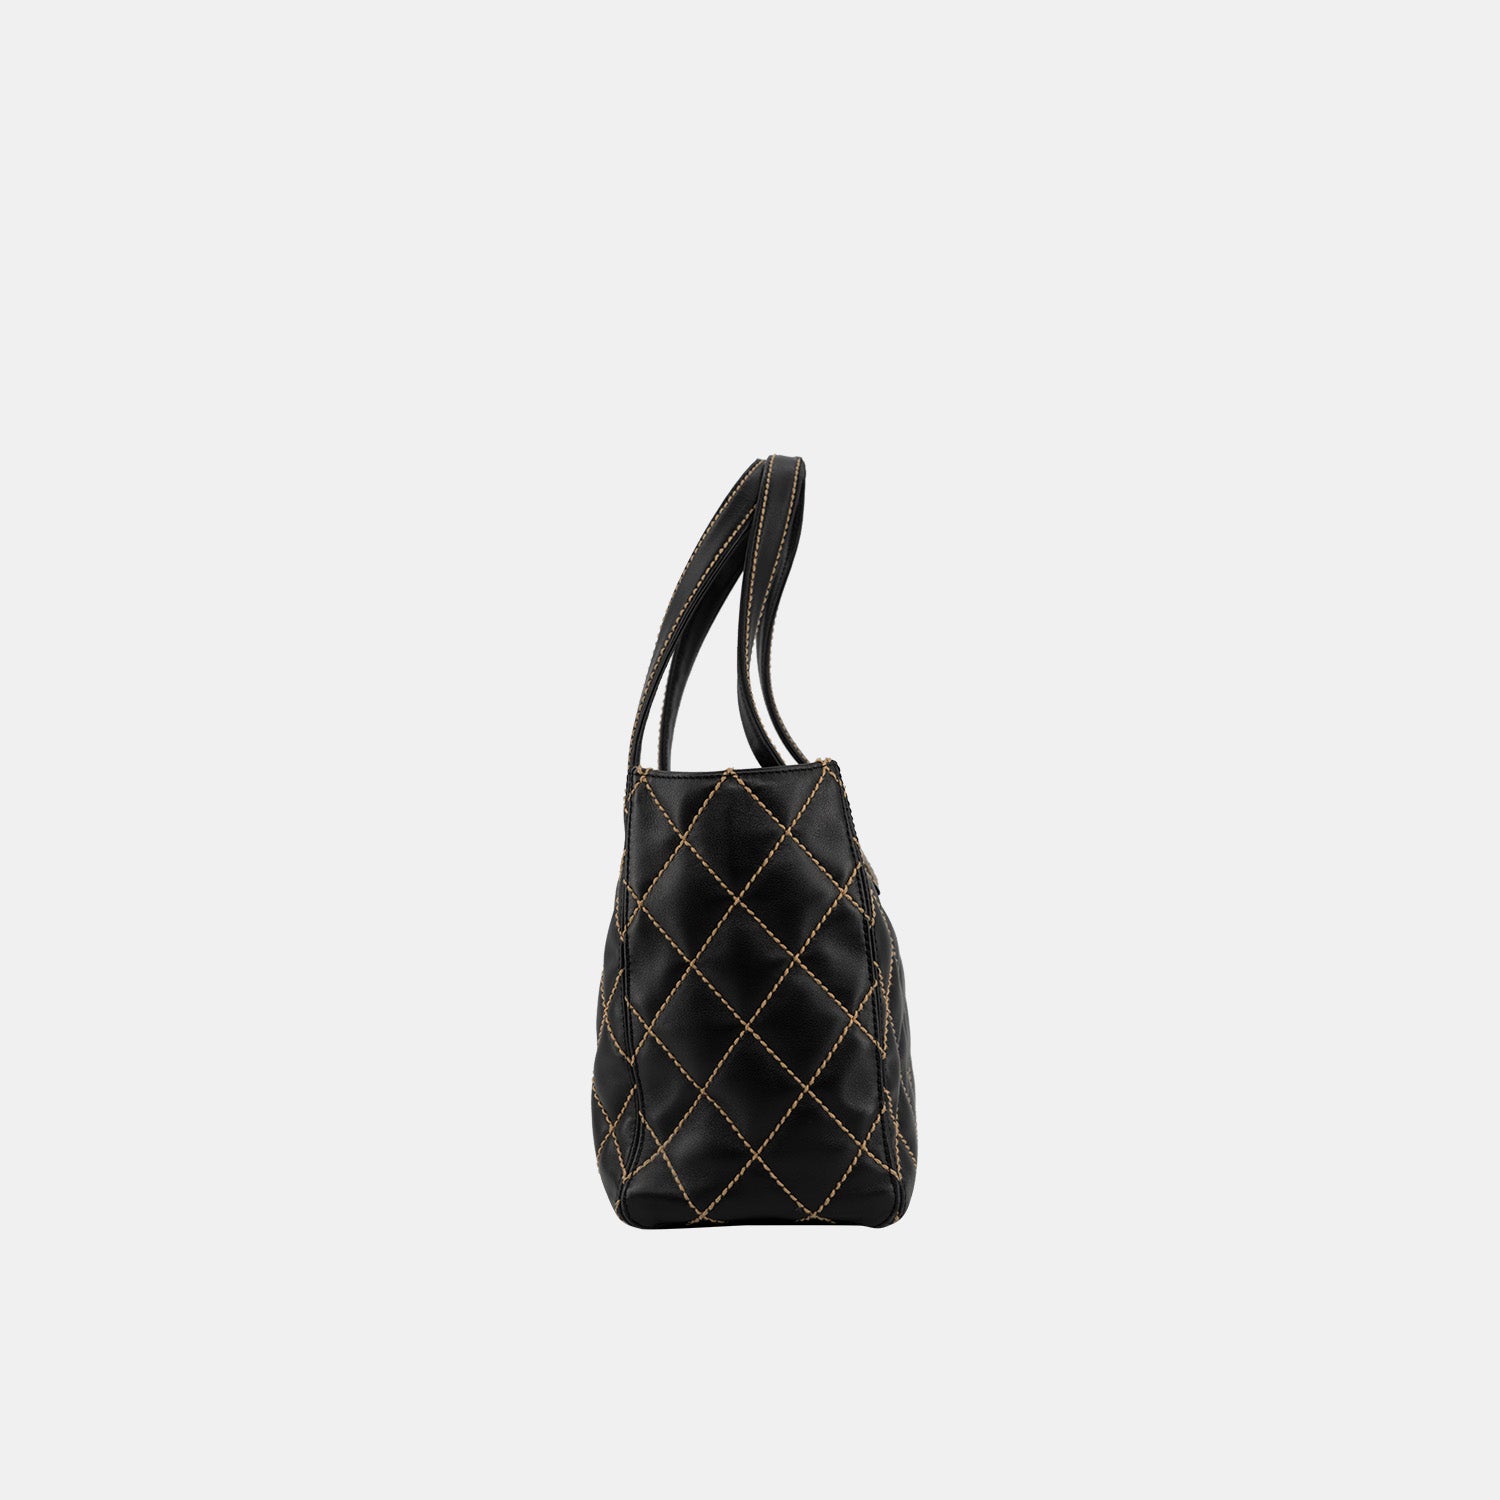 Chanel Wild Stitch Black Calfskin Leather Quilt Small Tote Bag